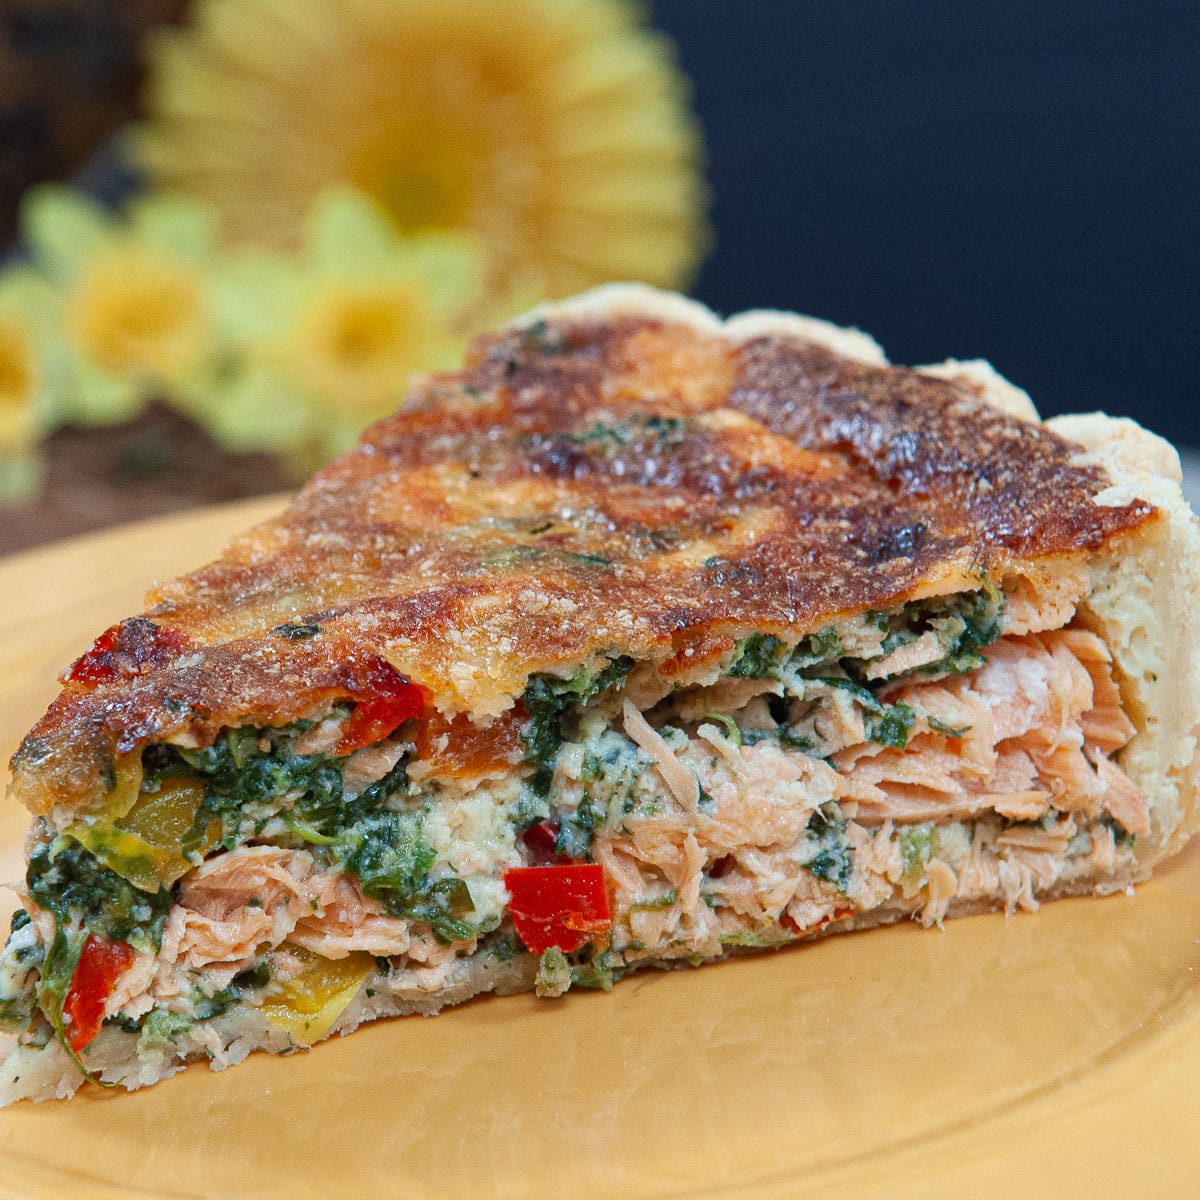 This Salmon Tart features a pate brisee crust filled iwth salmon and vegetables.